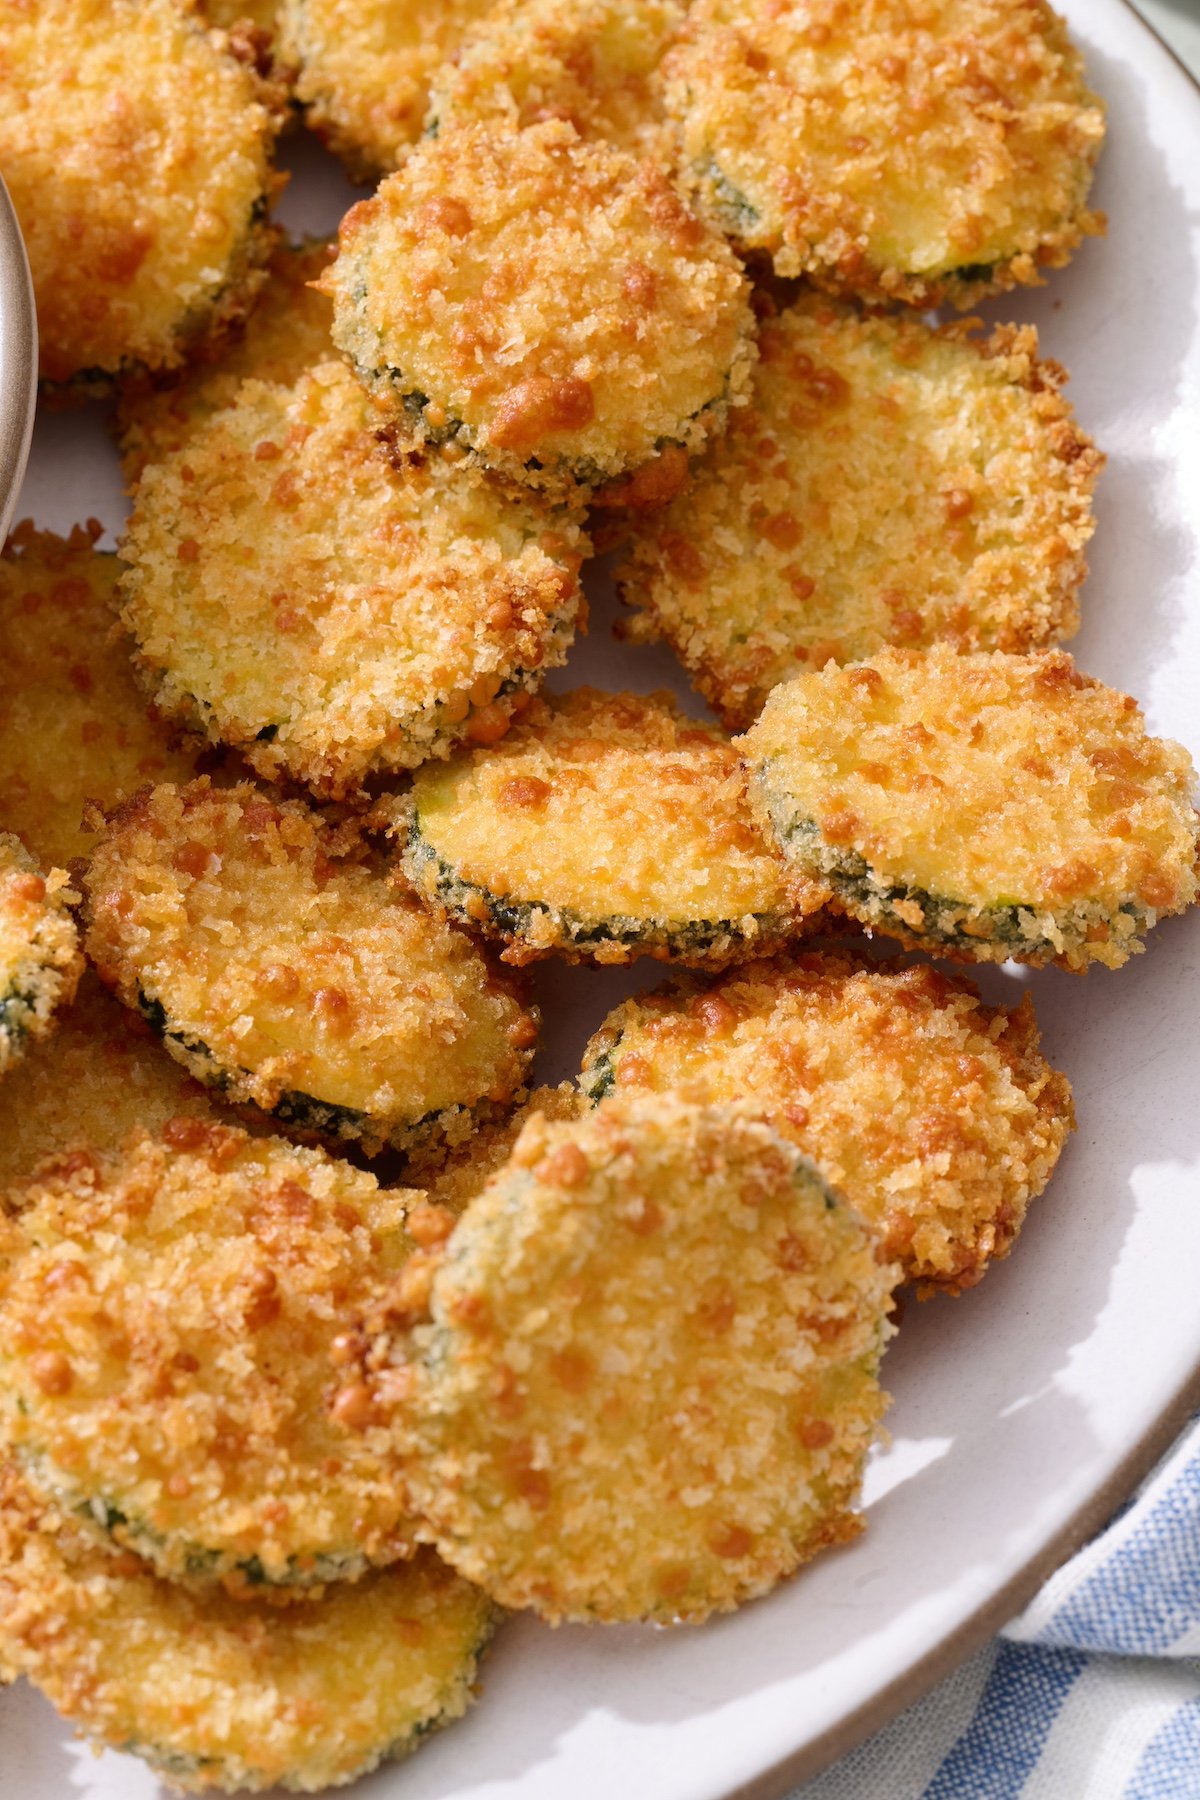 Baked zucchini coins on serving platter.